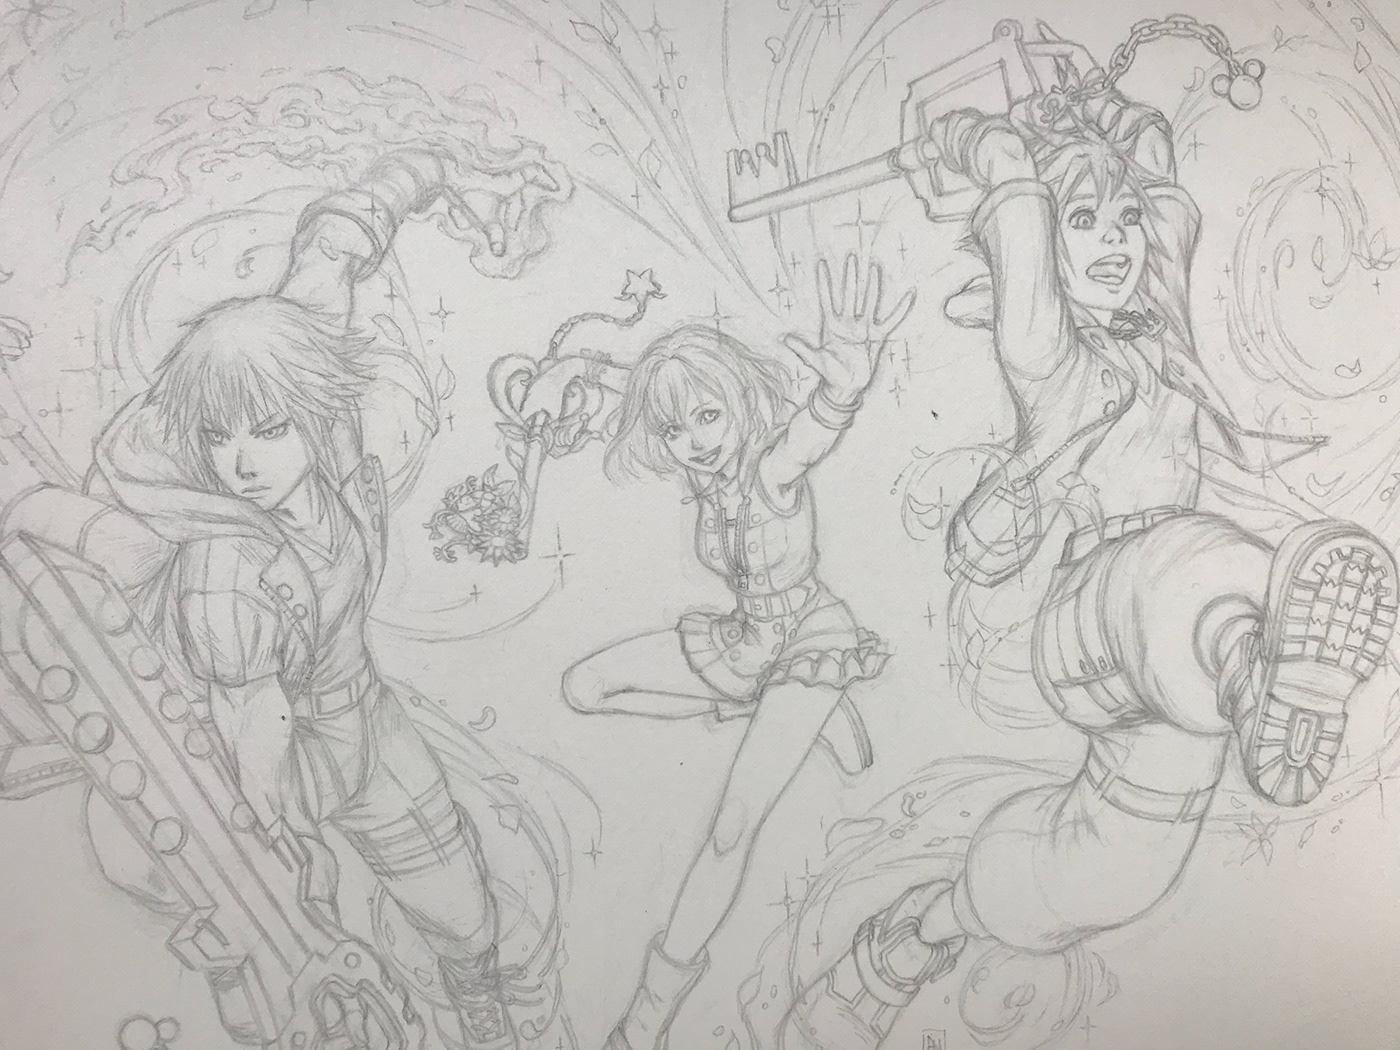 Final pencils for the drawing of the Kingdom Hearts friends from Destiny Islands.